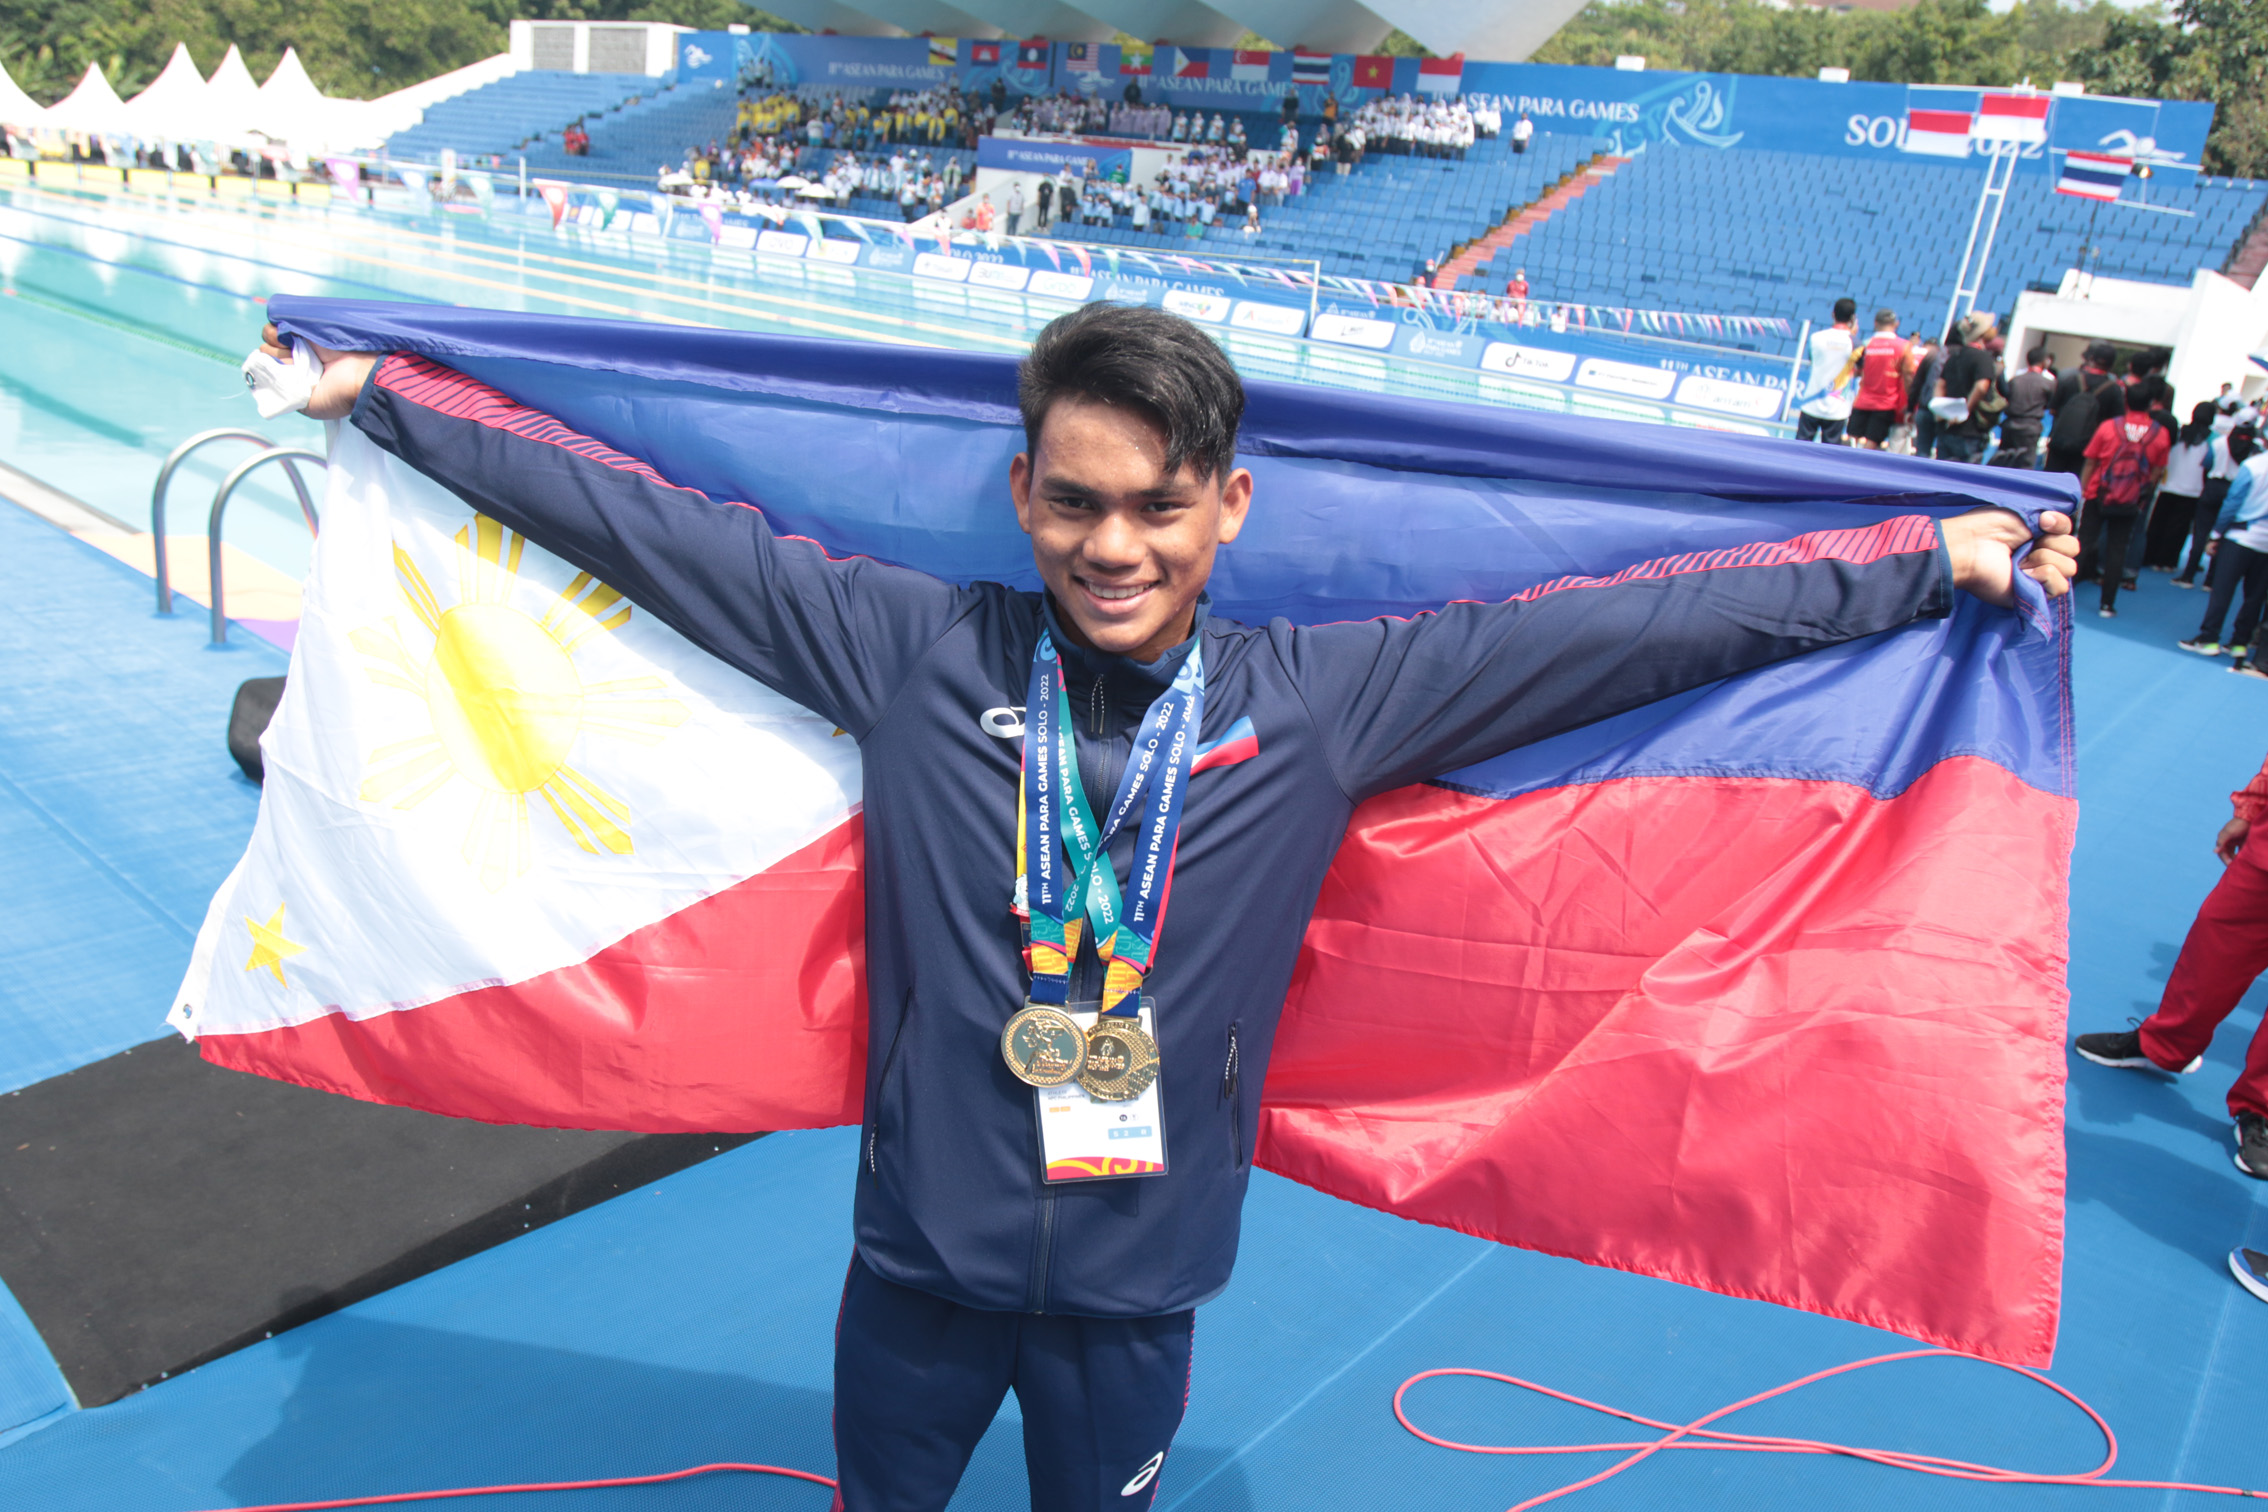 Ariel Joseph Alegarbes splashes his way to victory in the men’s 50-meter butterfly S14 event in the swimming competition of the 11th ASEAN Para Games Tuesday at Jatadiri Sports Complex pool in Semarang, Indonesia. 